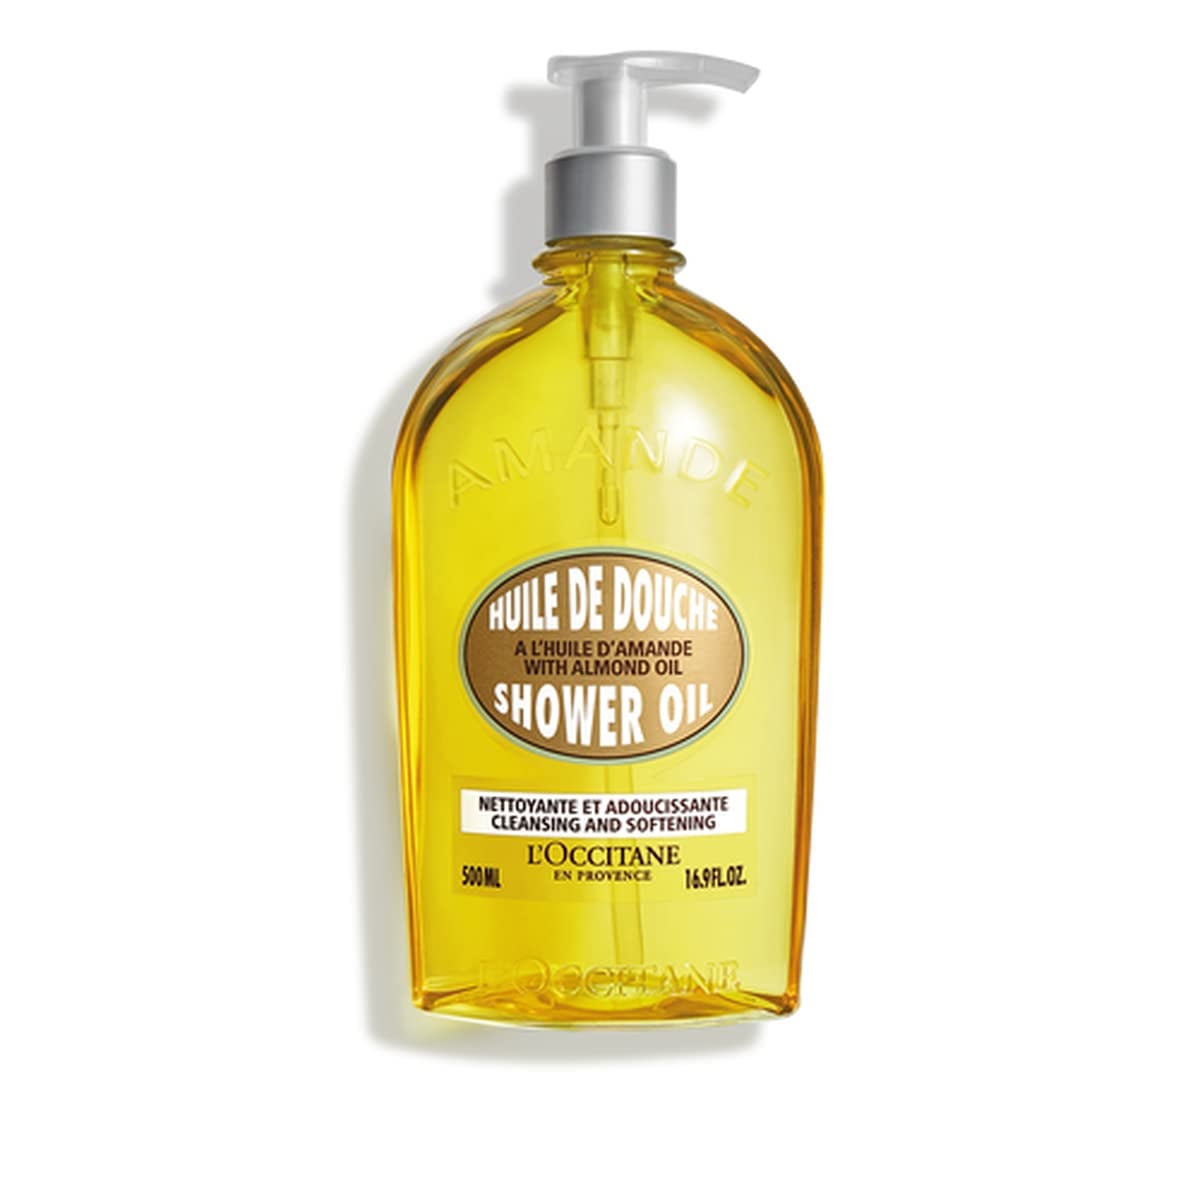 Best Prime Day Beauty Deal on a Shower Oil